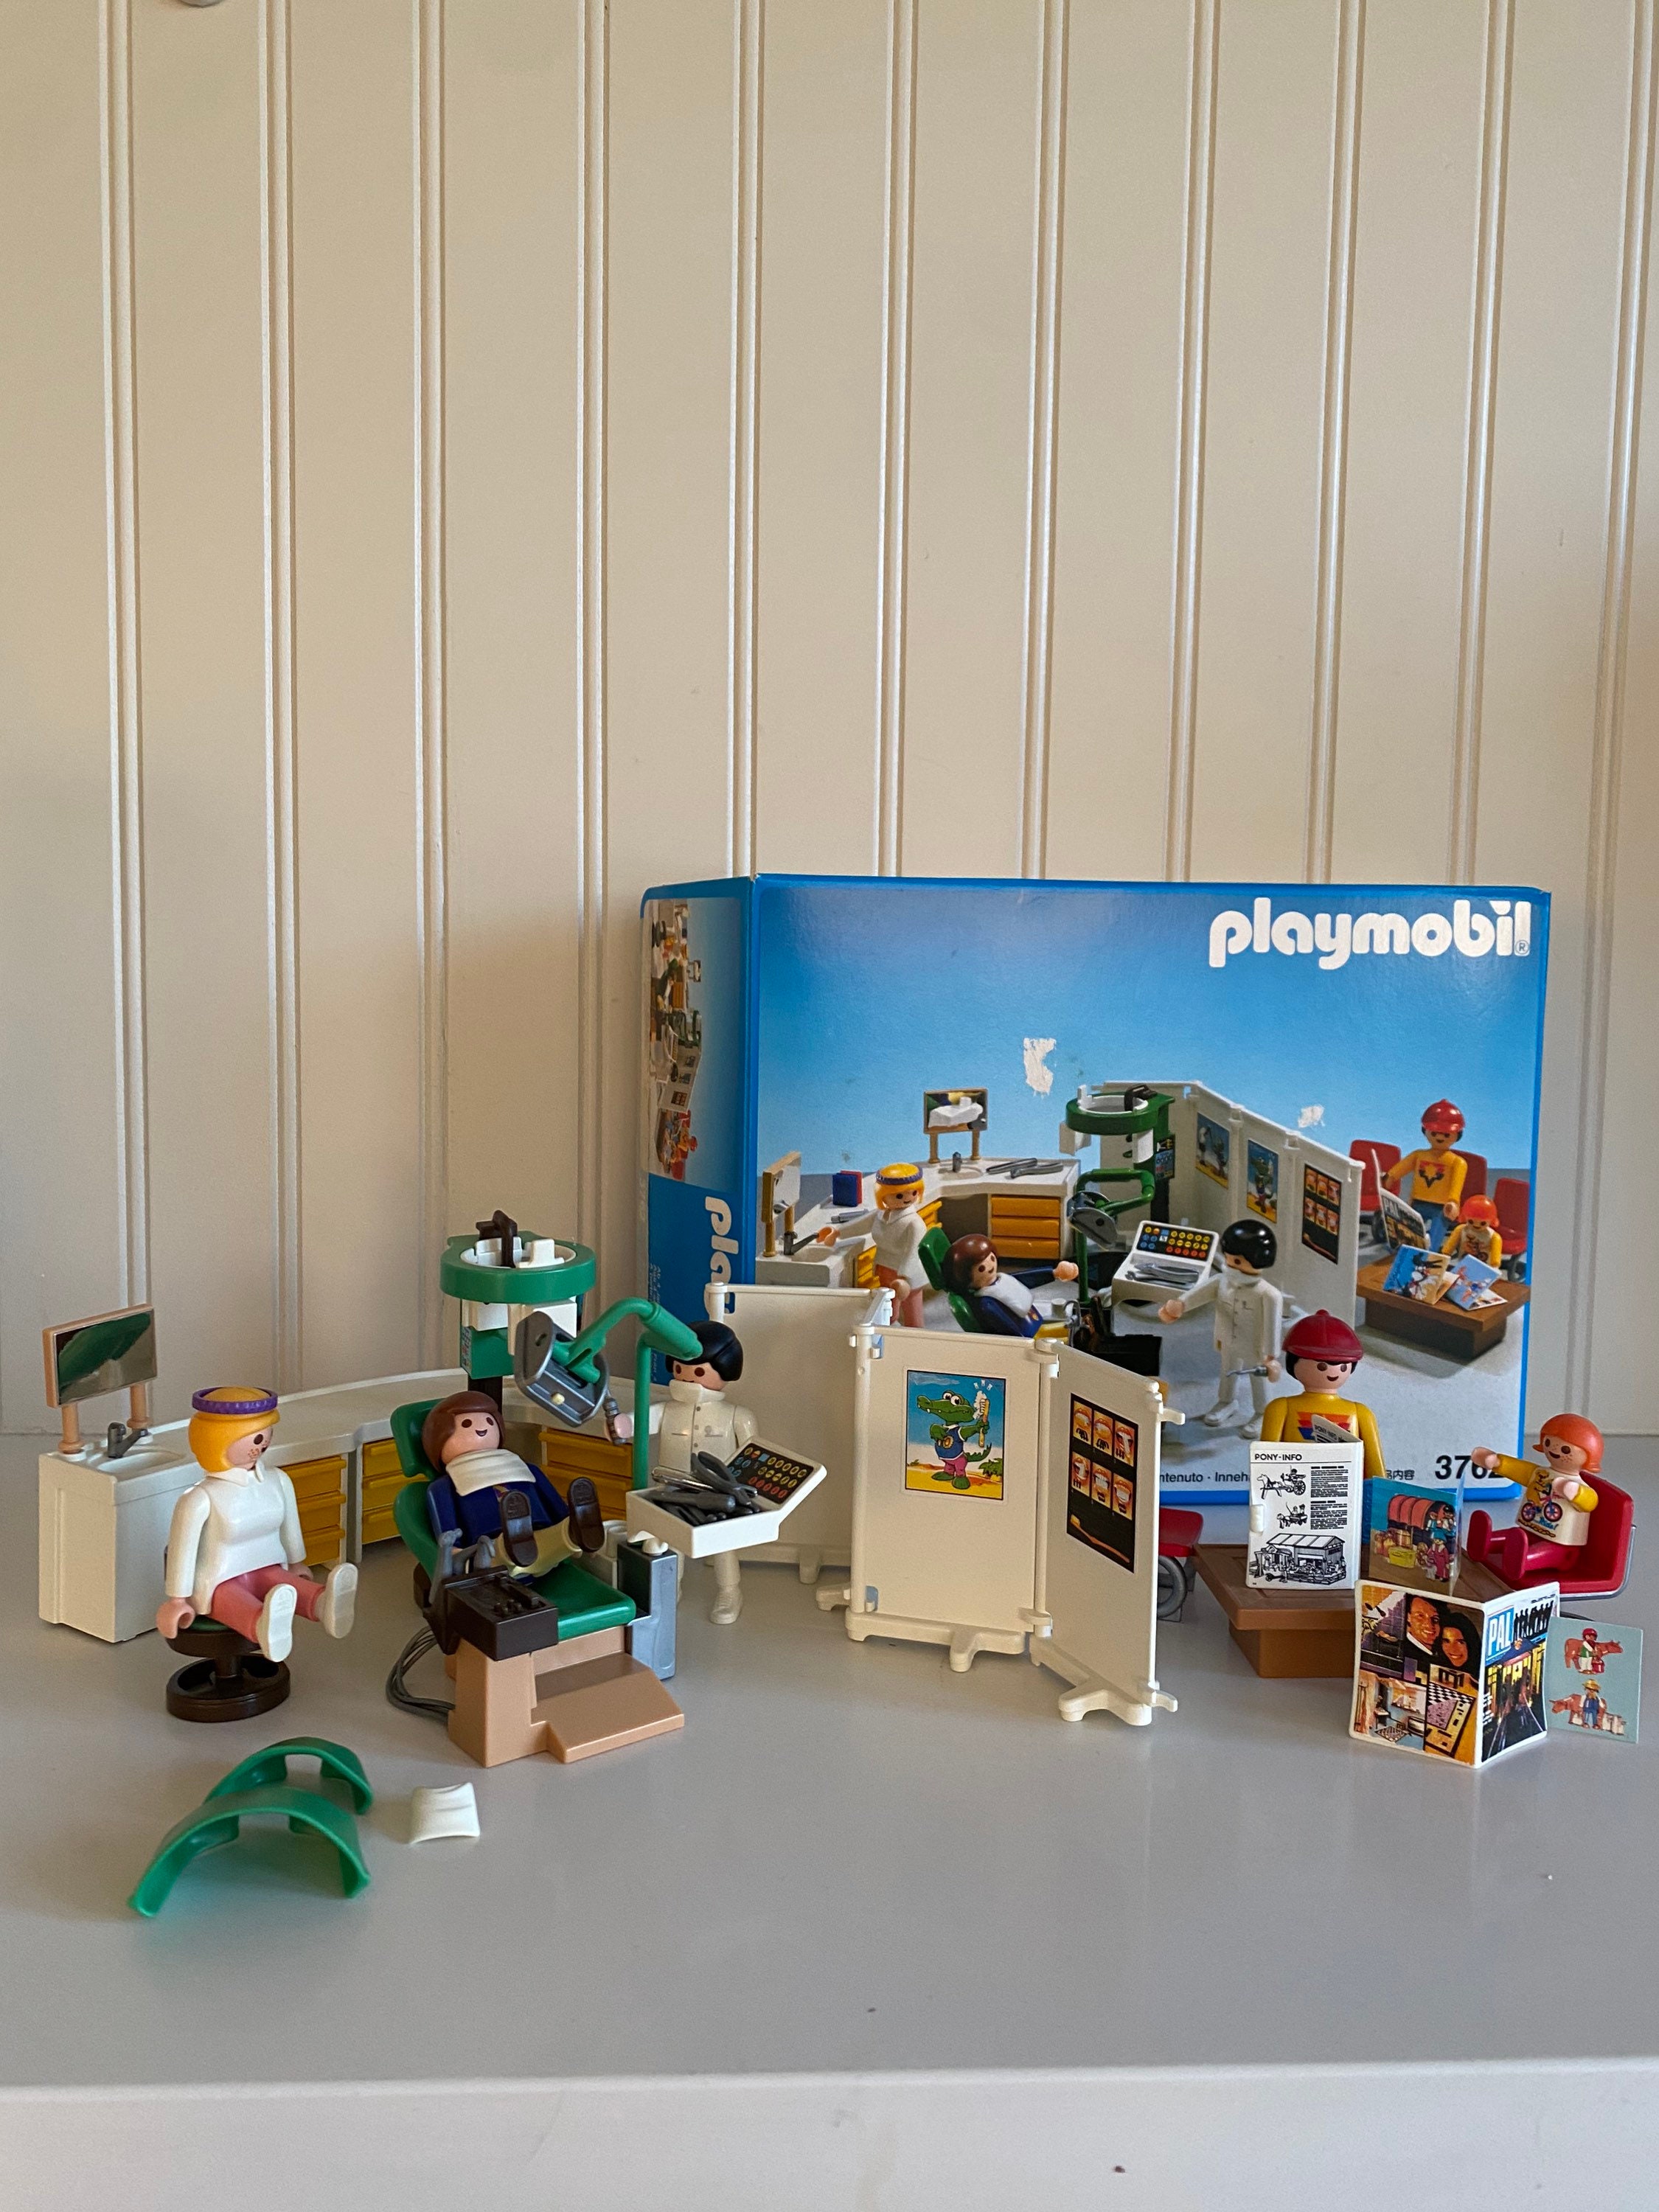 Buy Vintage Playmobil 3762 and Waiting Online in India - Etsy